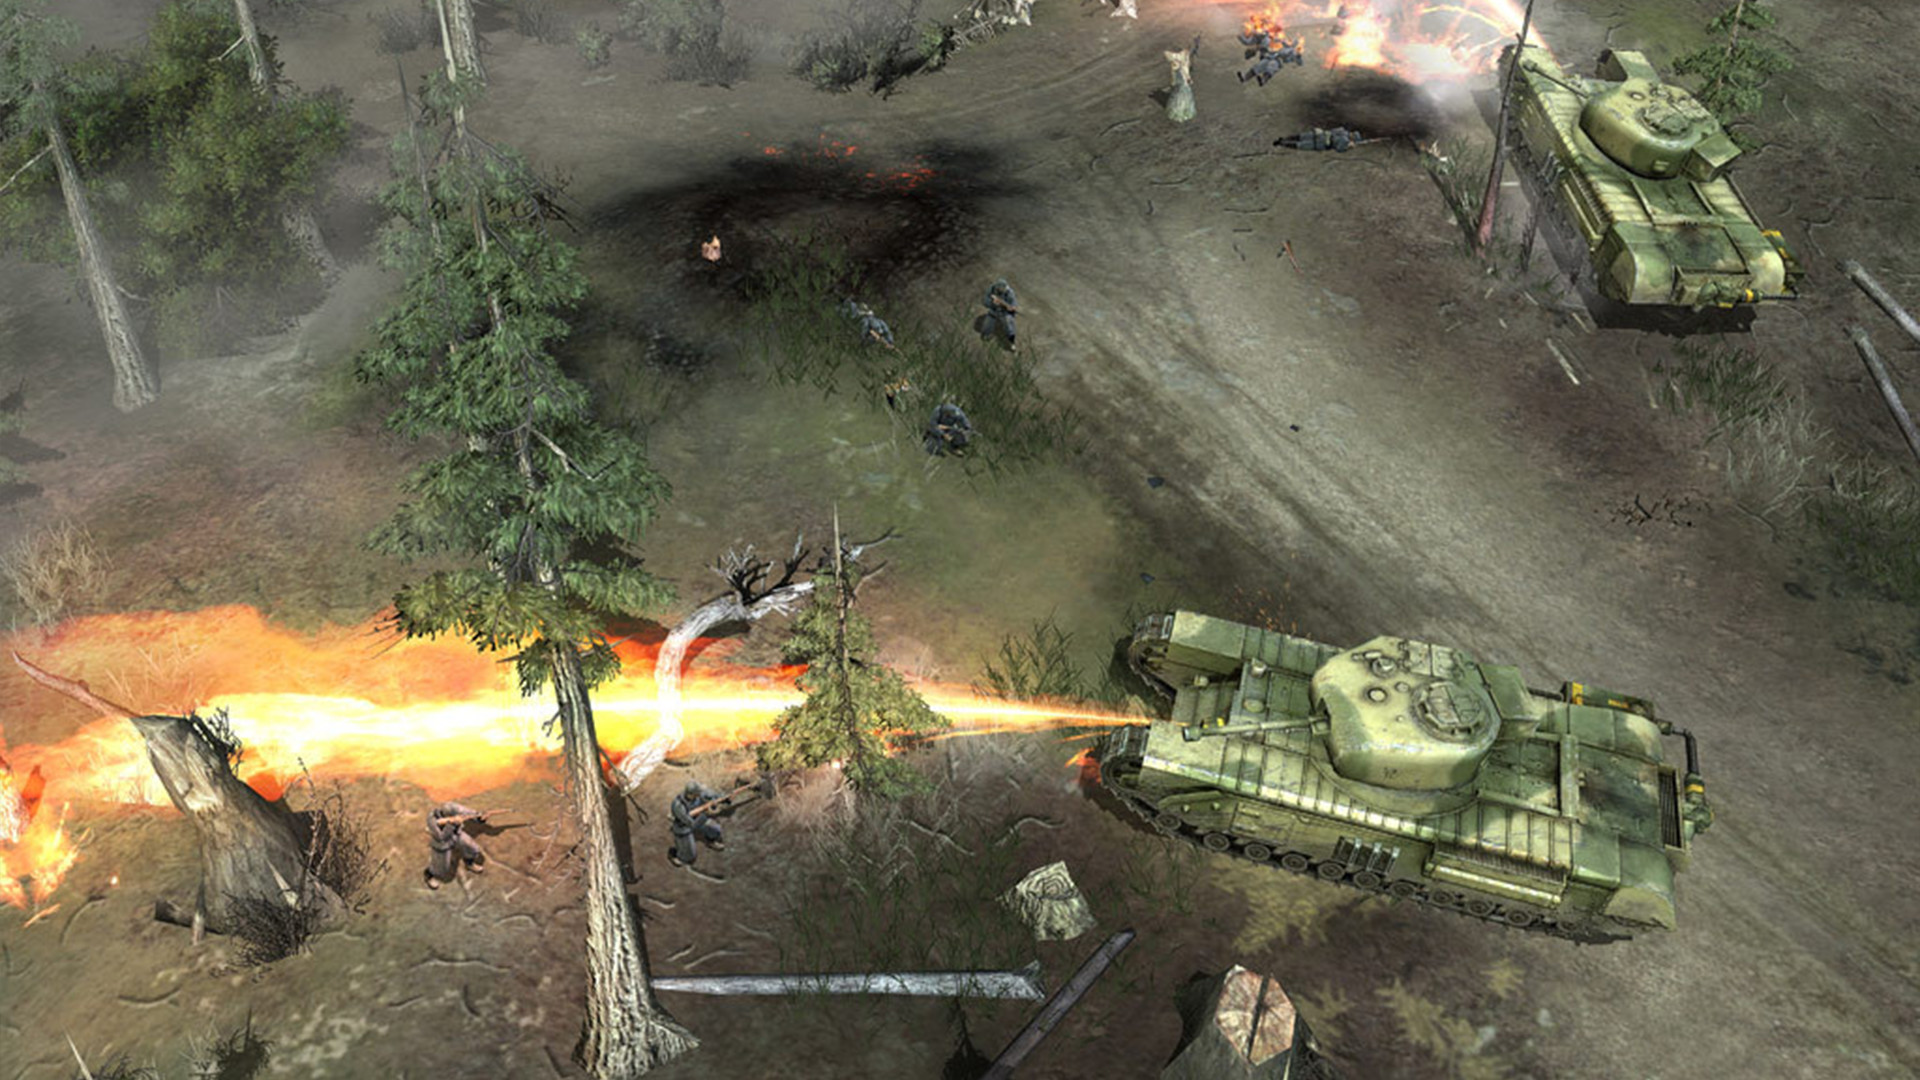 company of heroes: opposing fronts work on windows 10